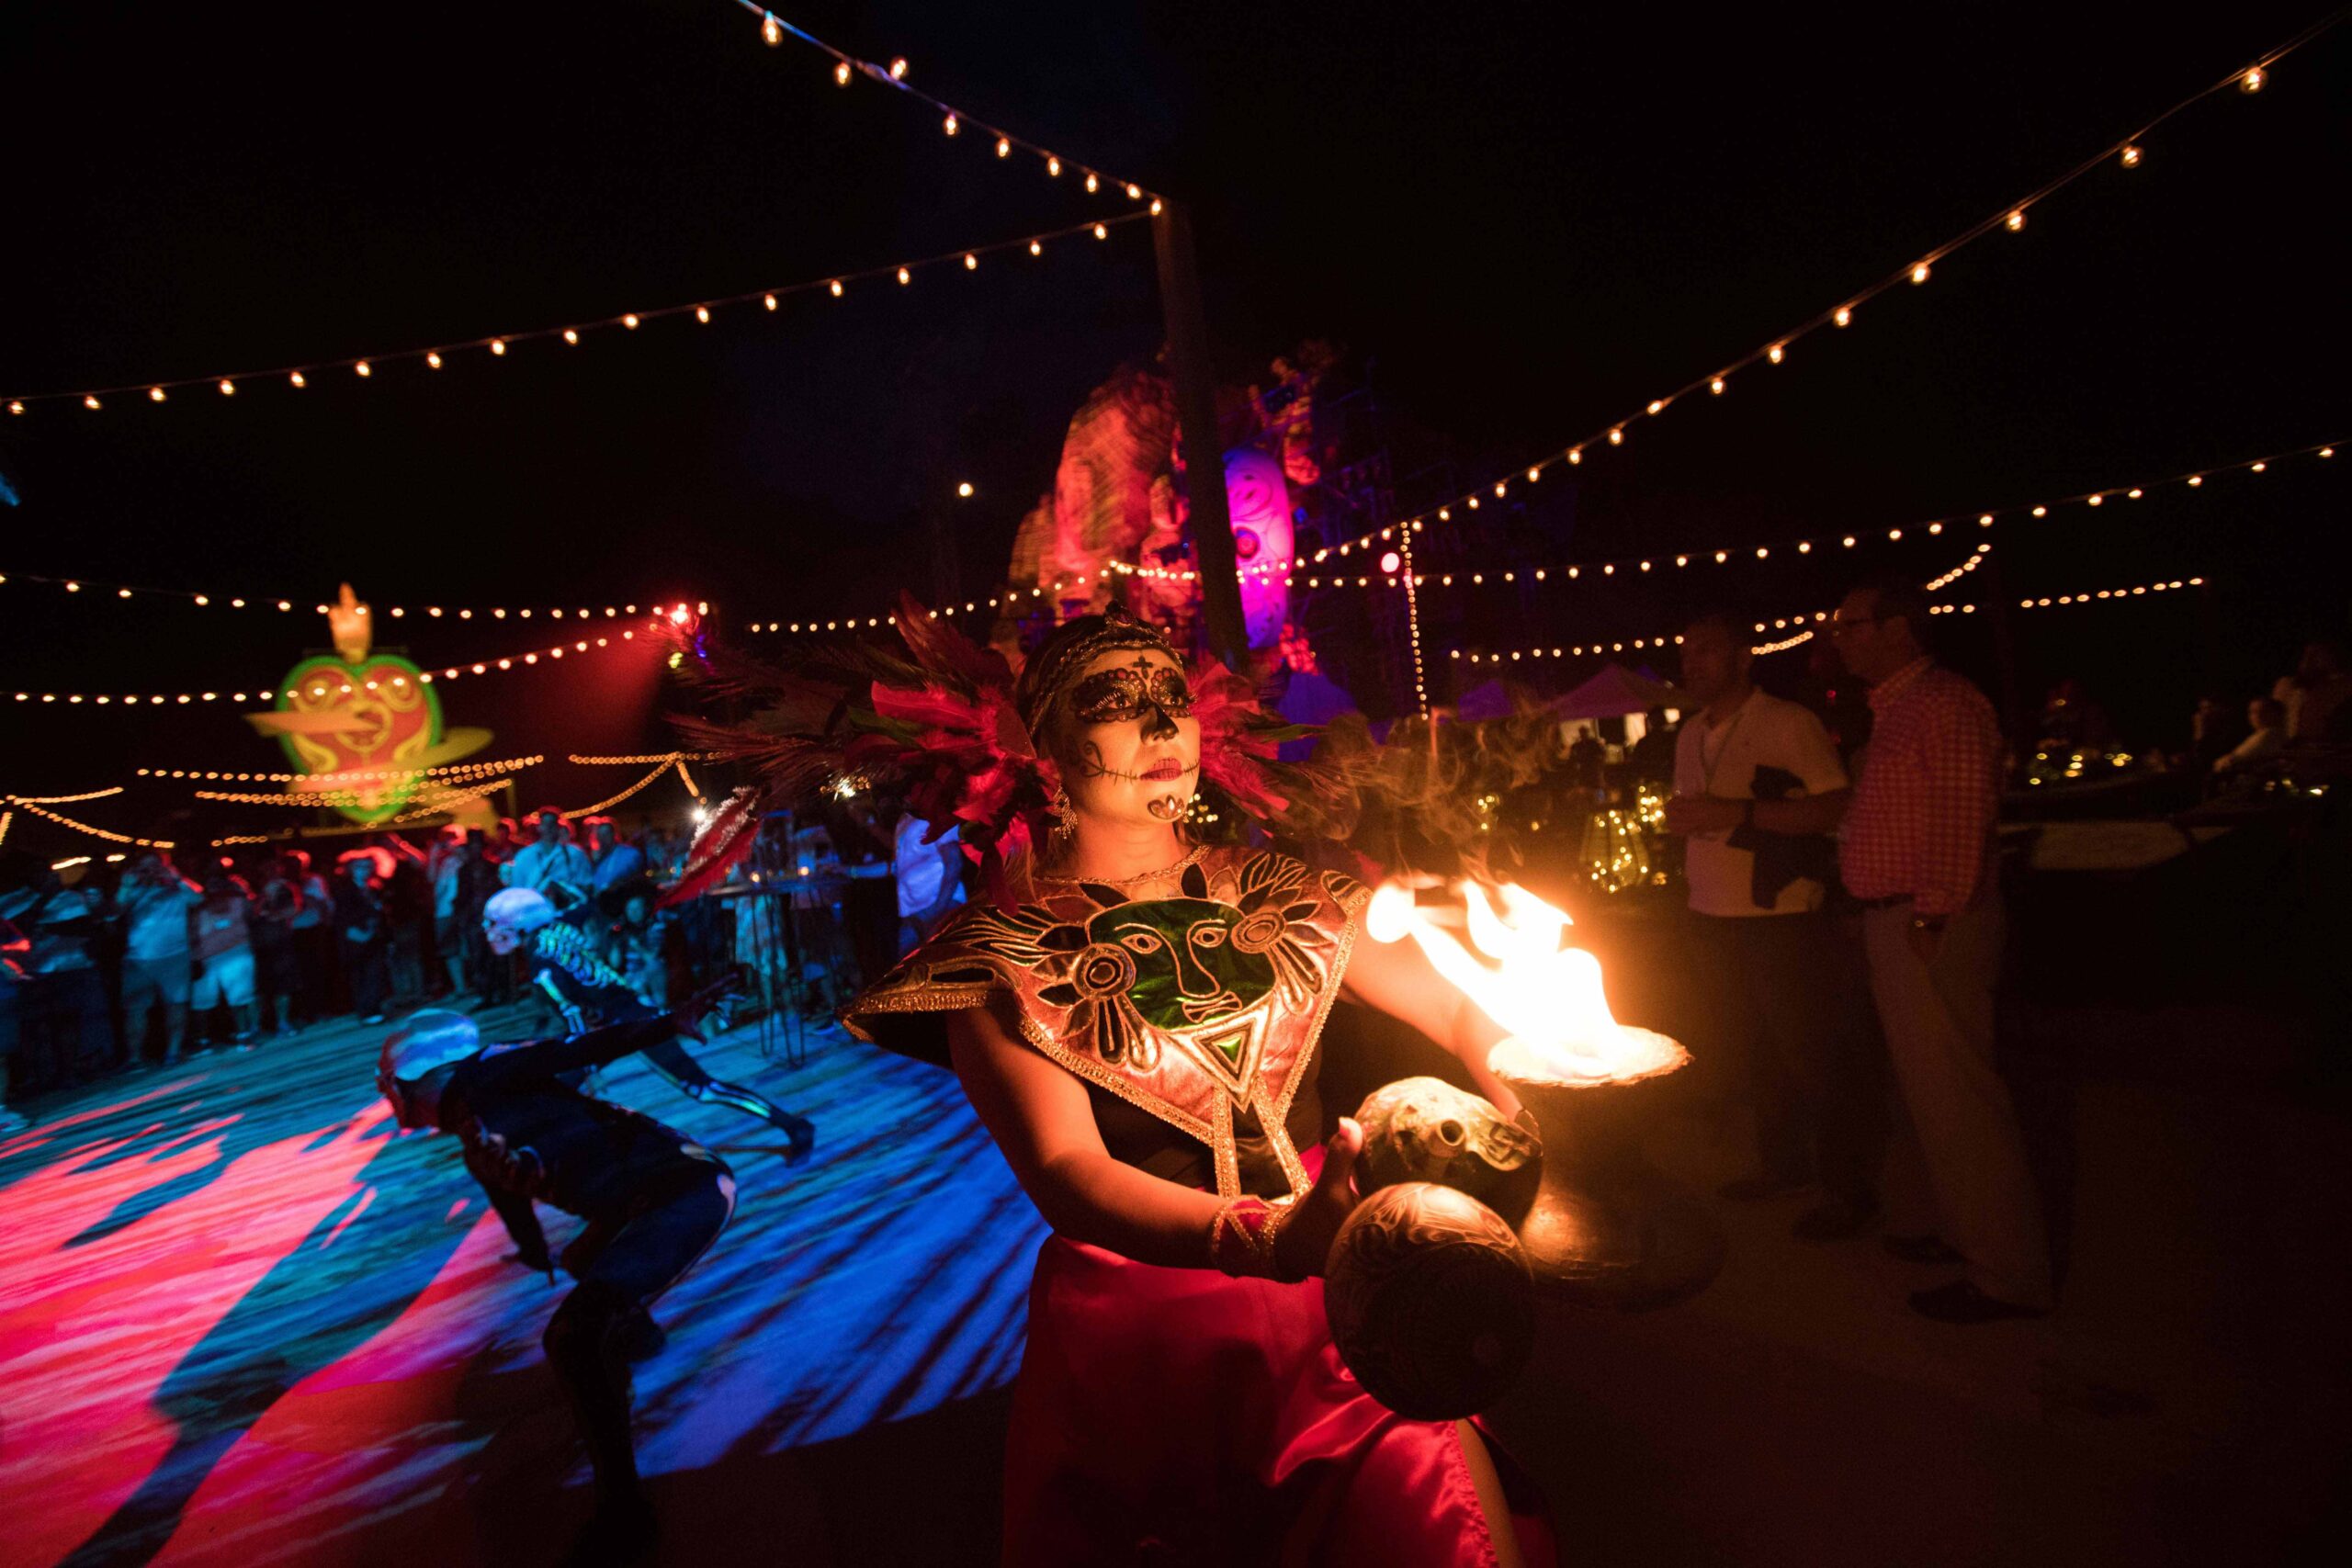 A live Day of the dead themed performance at night features a women with a costume carrying a torch.